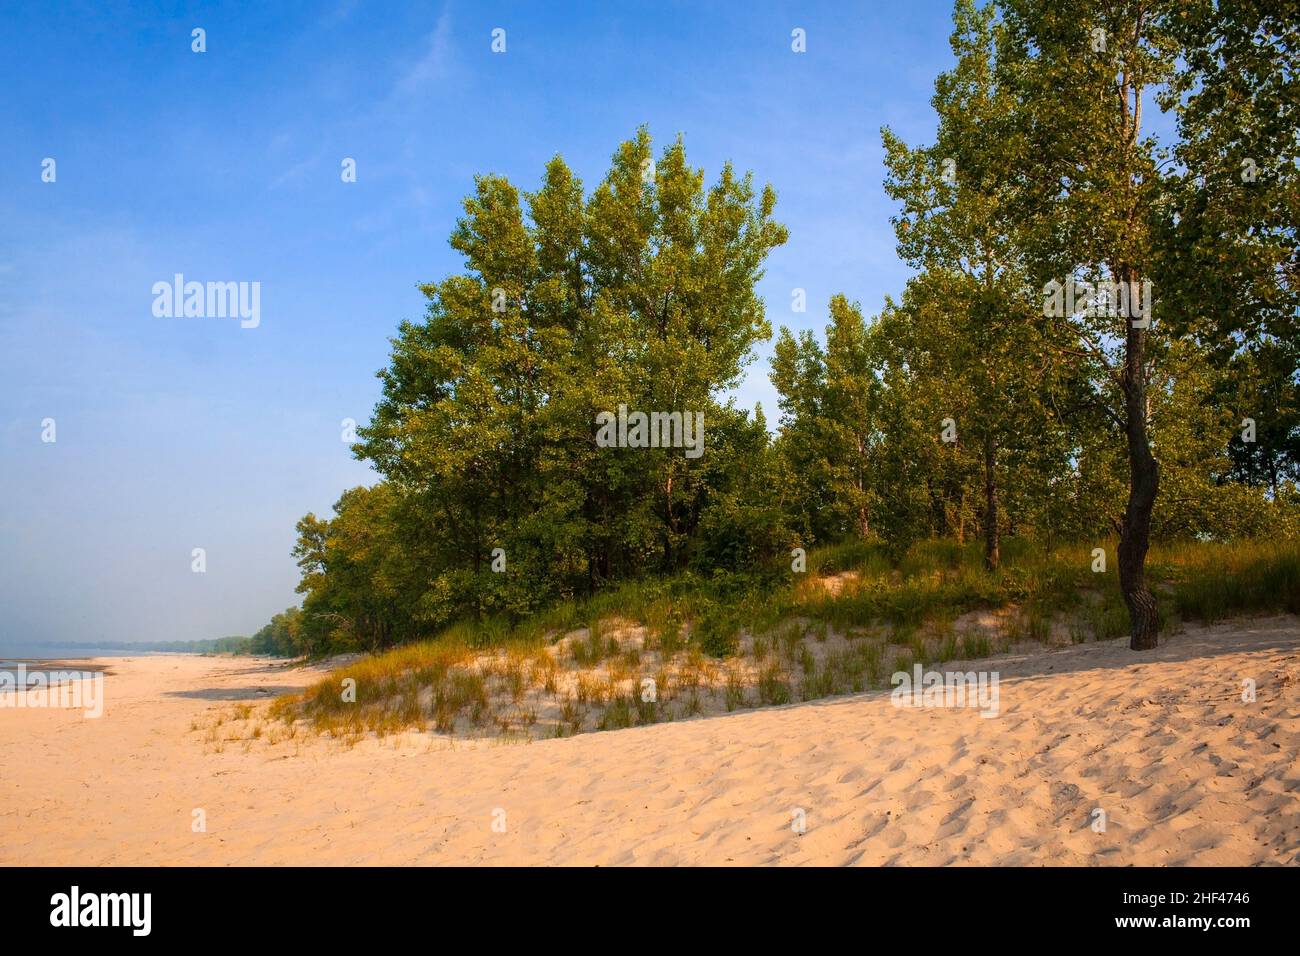 The sand dunes and beach vegetation along Lake Erie at Long Point Provincial Park, Ontario, Canada Stock Photo